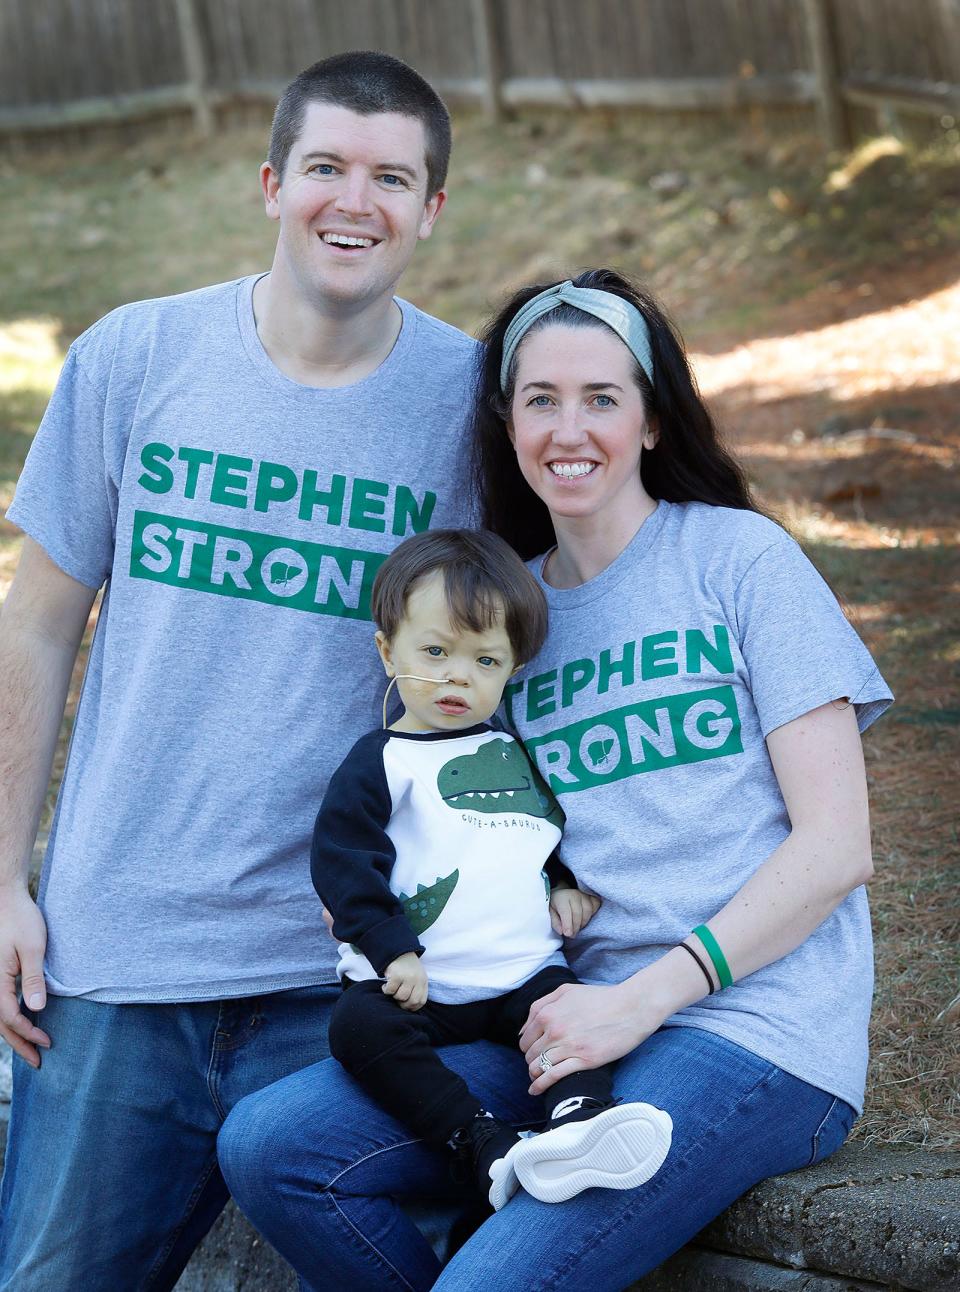 The Squillante family, Stephen, Shannon and 18 month old son Stephen III who is need of a liver transplant, at home in Weymouth on Wednesday March 22, 2023 